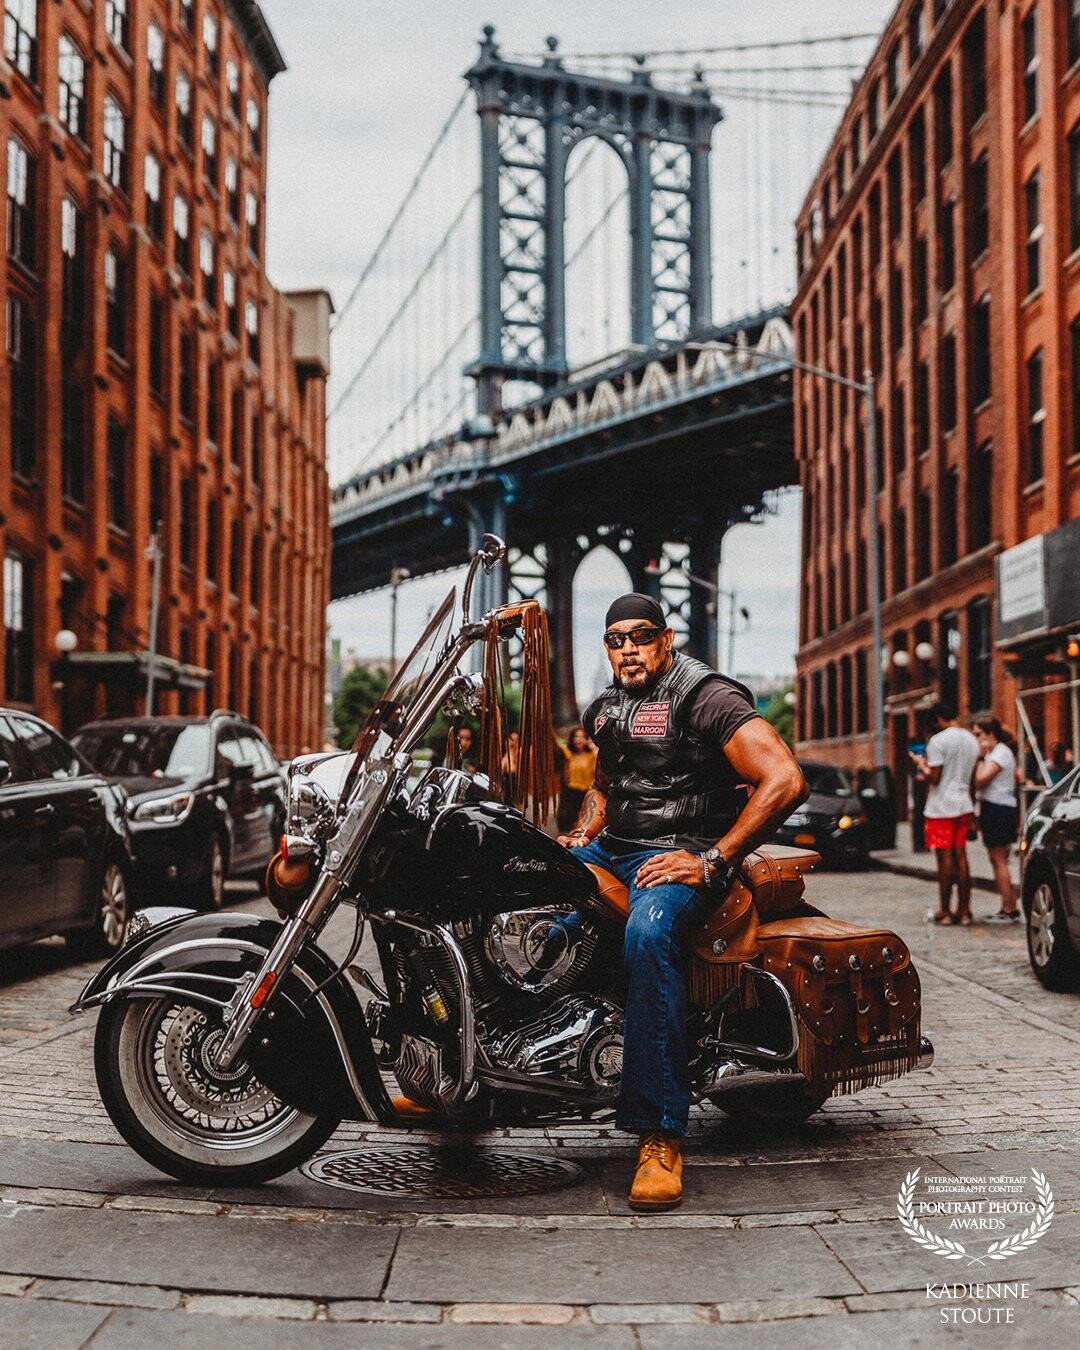 A portrait of my dad on his motorcycle in Dumbo Brooklyn. It is a Brenizer and it the result of 7 images stitched together. Shot with Nikon d810 and an ad200.